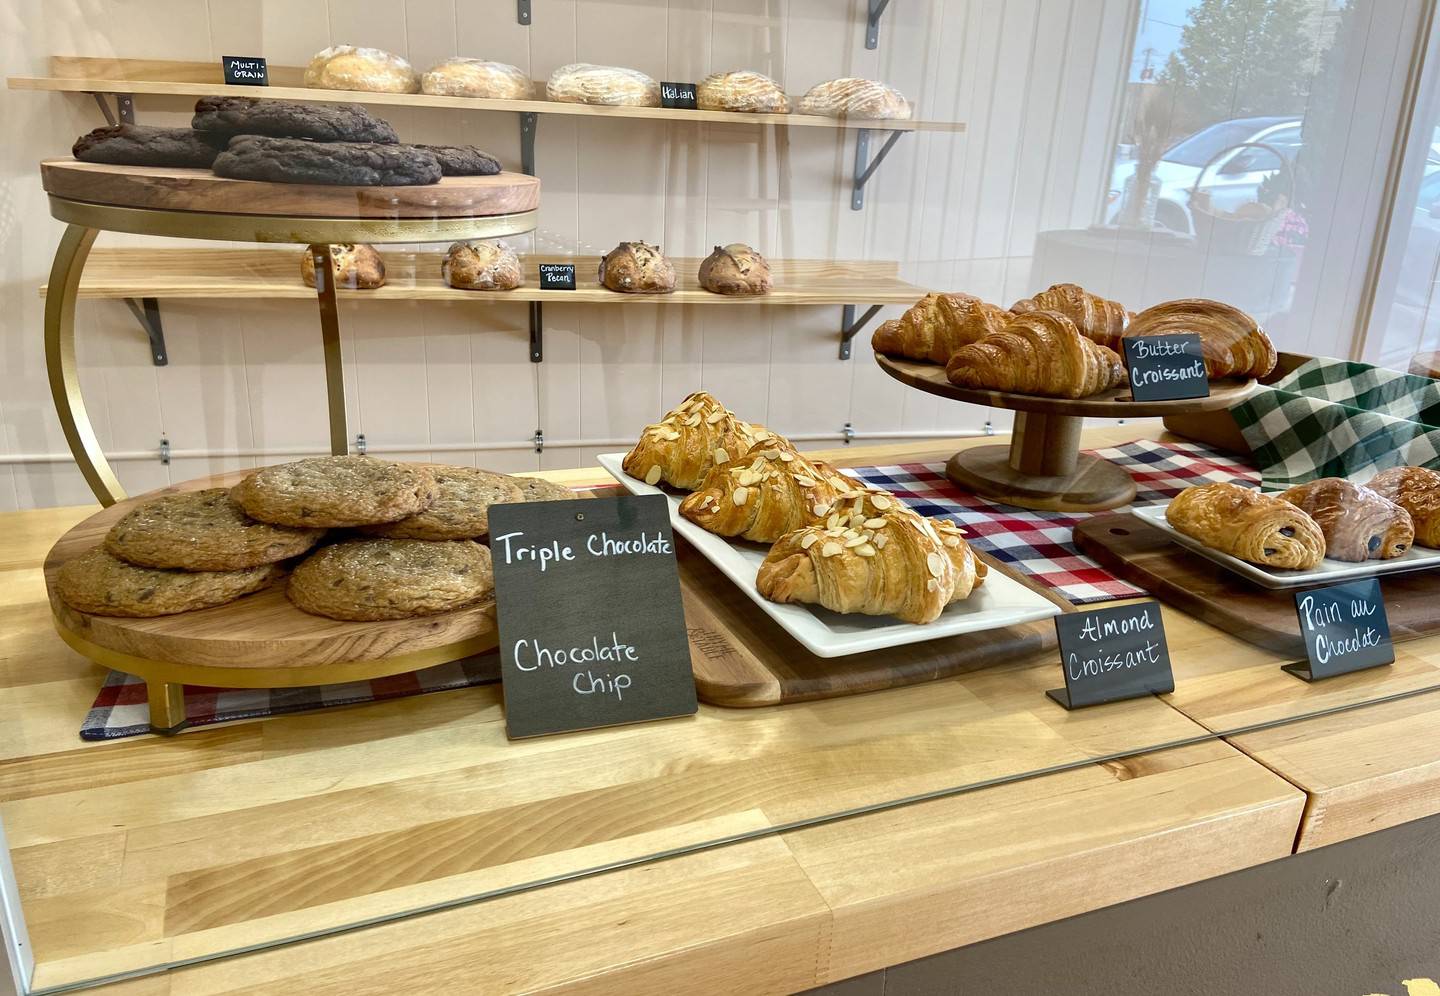 Photo submitted by co-owner Kent Maze of Millstone Bakery featuring their pastry and bread display